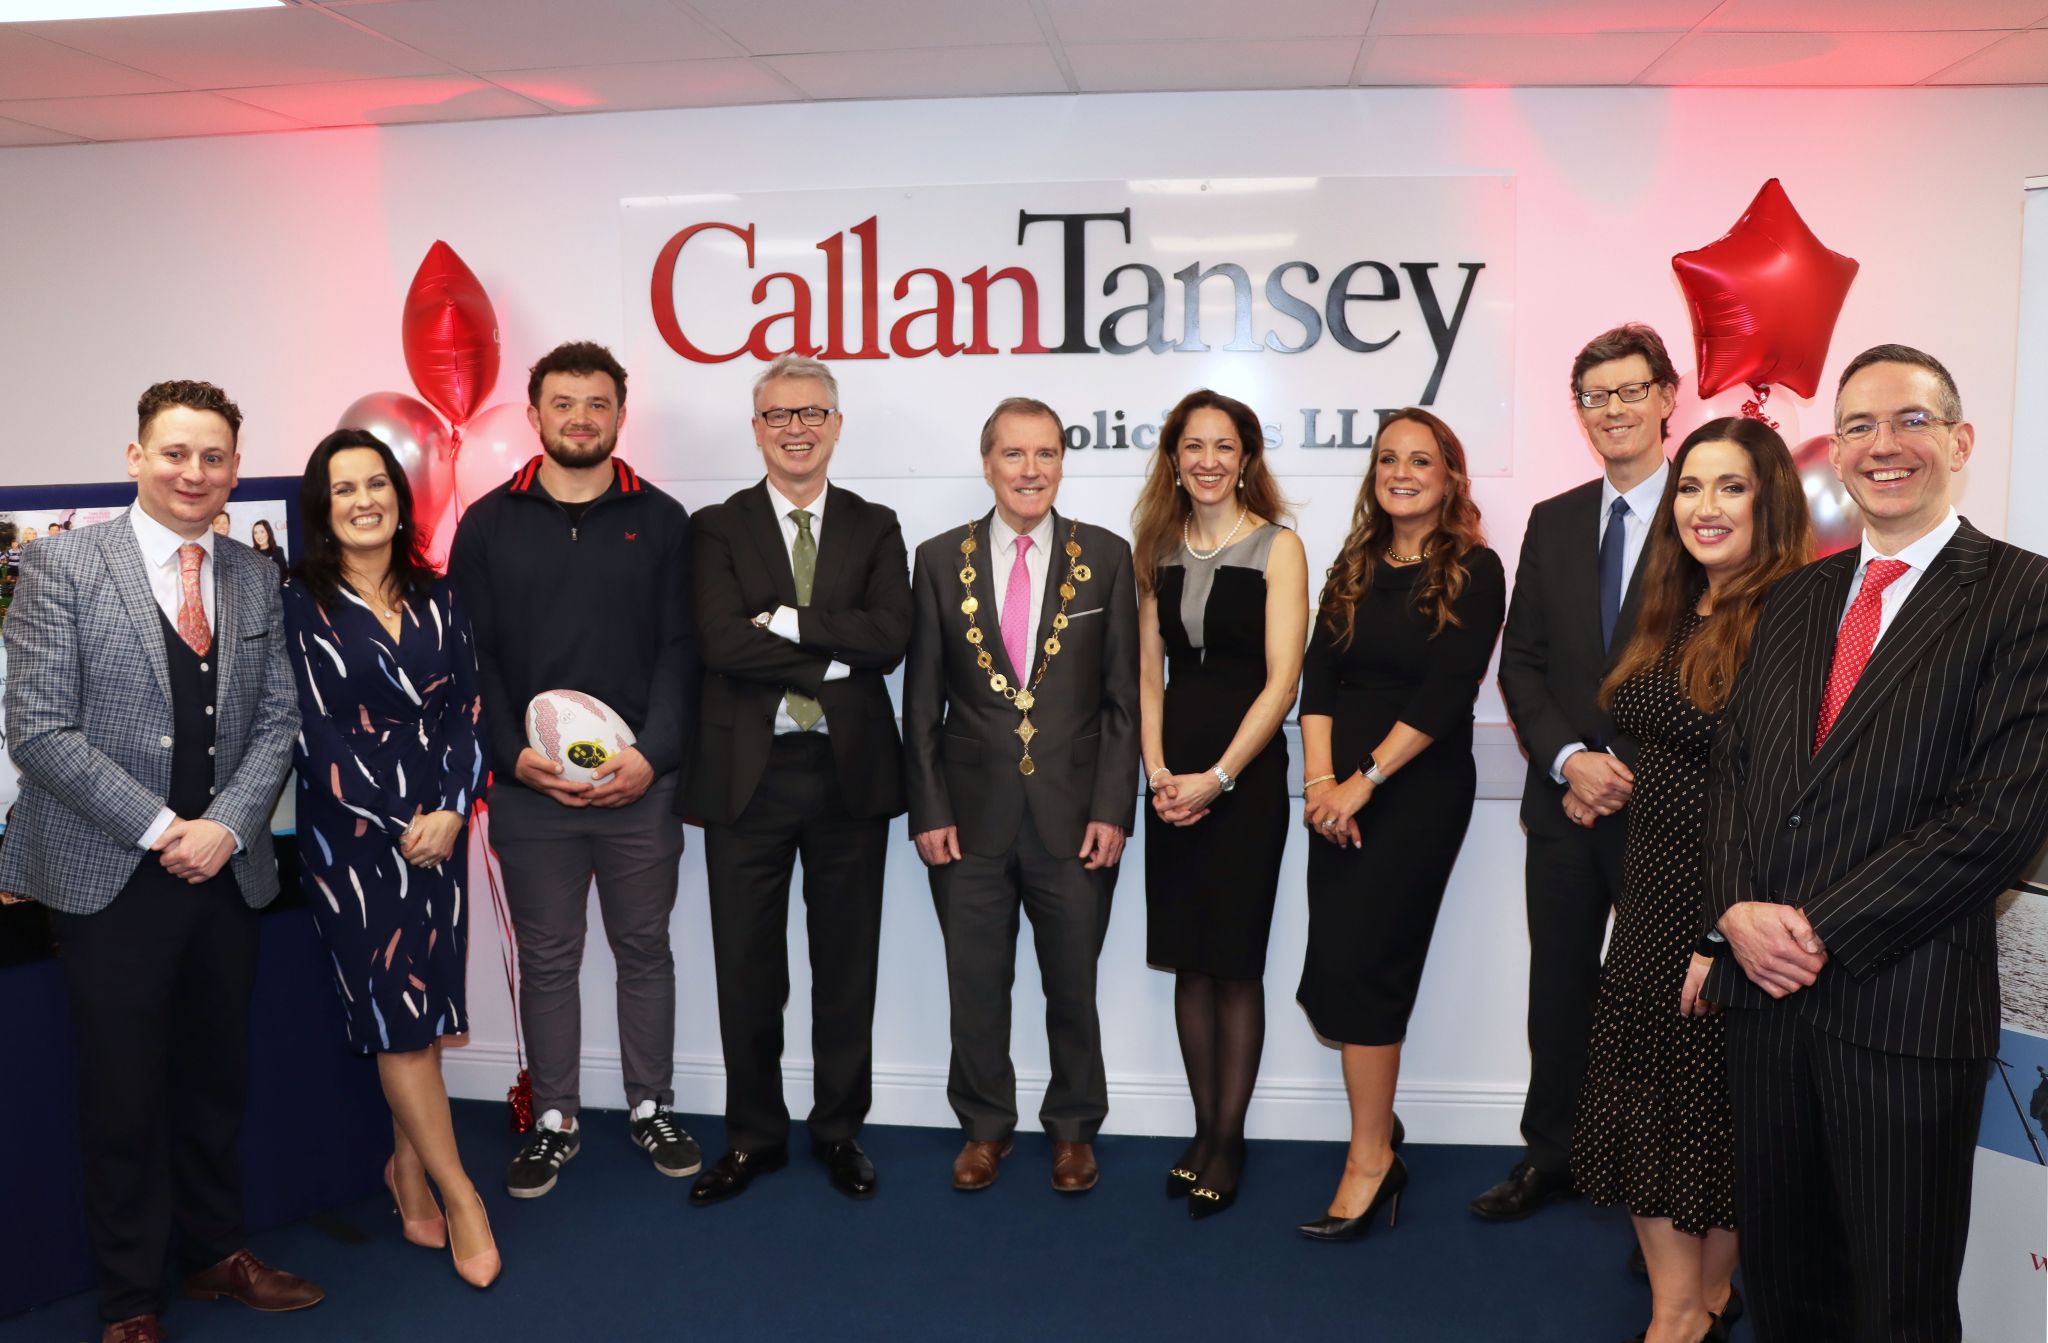 Callan Tansey celebrates three years in Limerick and Mid-West